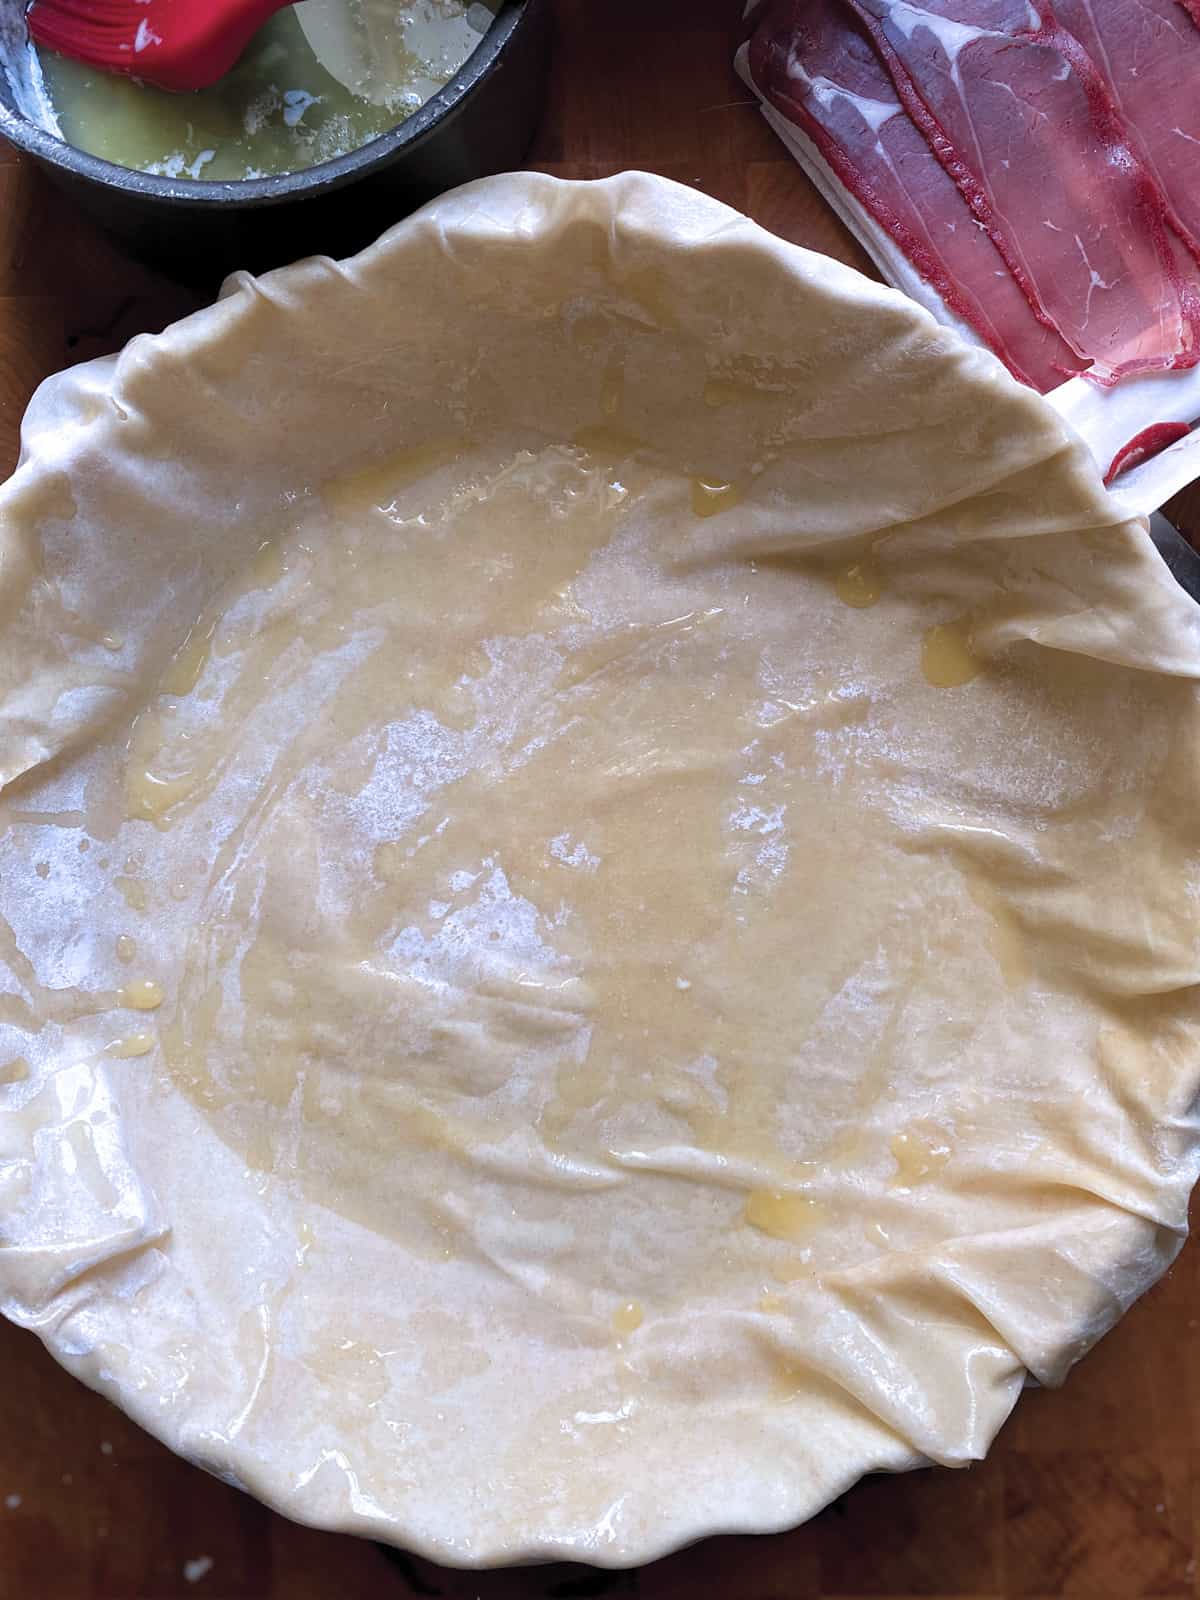 Phyllo sheets laid down on a round baking pan.